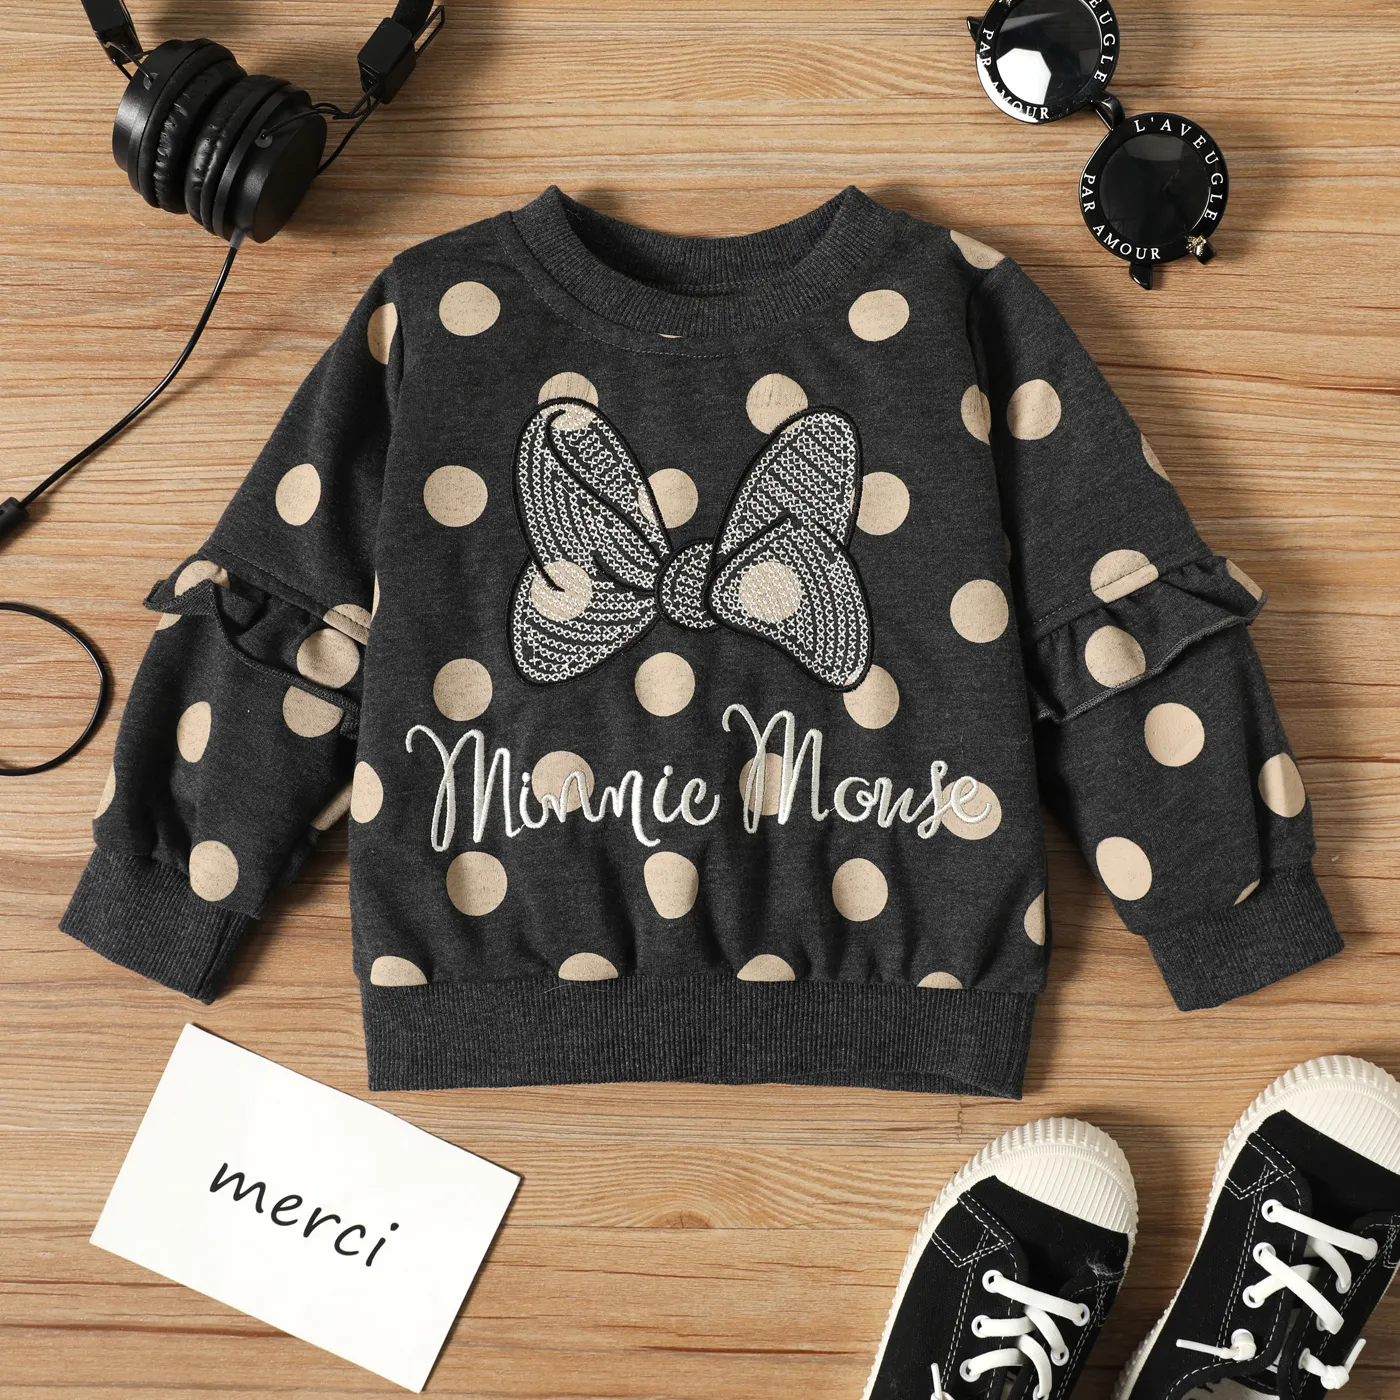 Toddler Girl 100% Cotton Letter Butterfly/Floral Animal Print Pullover Sweatshirt